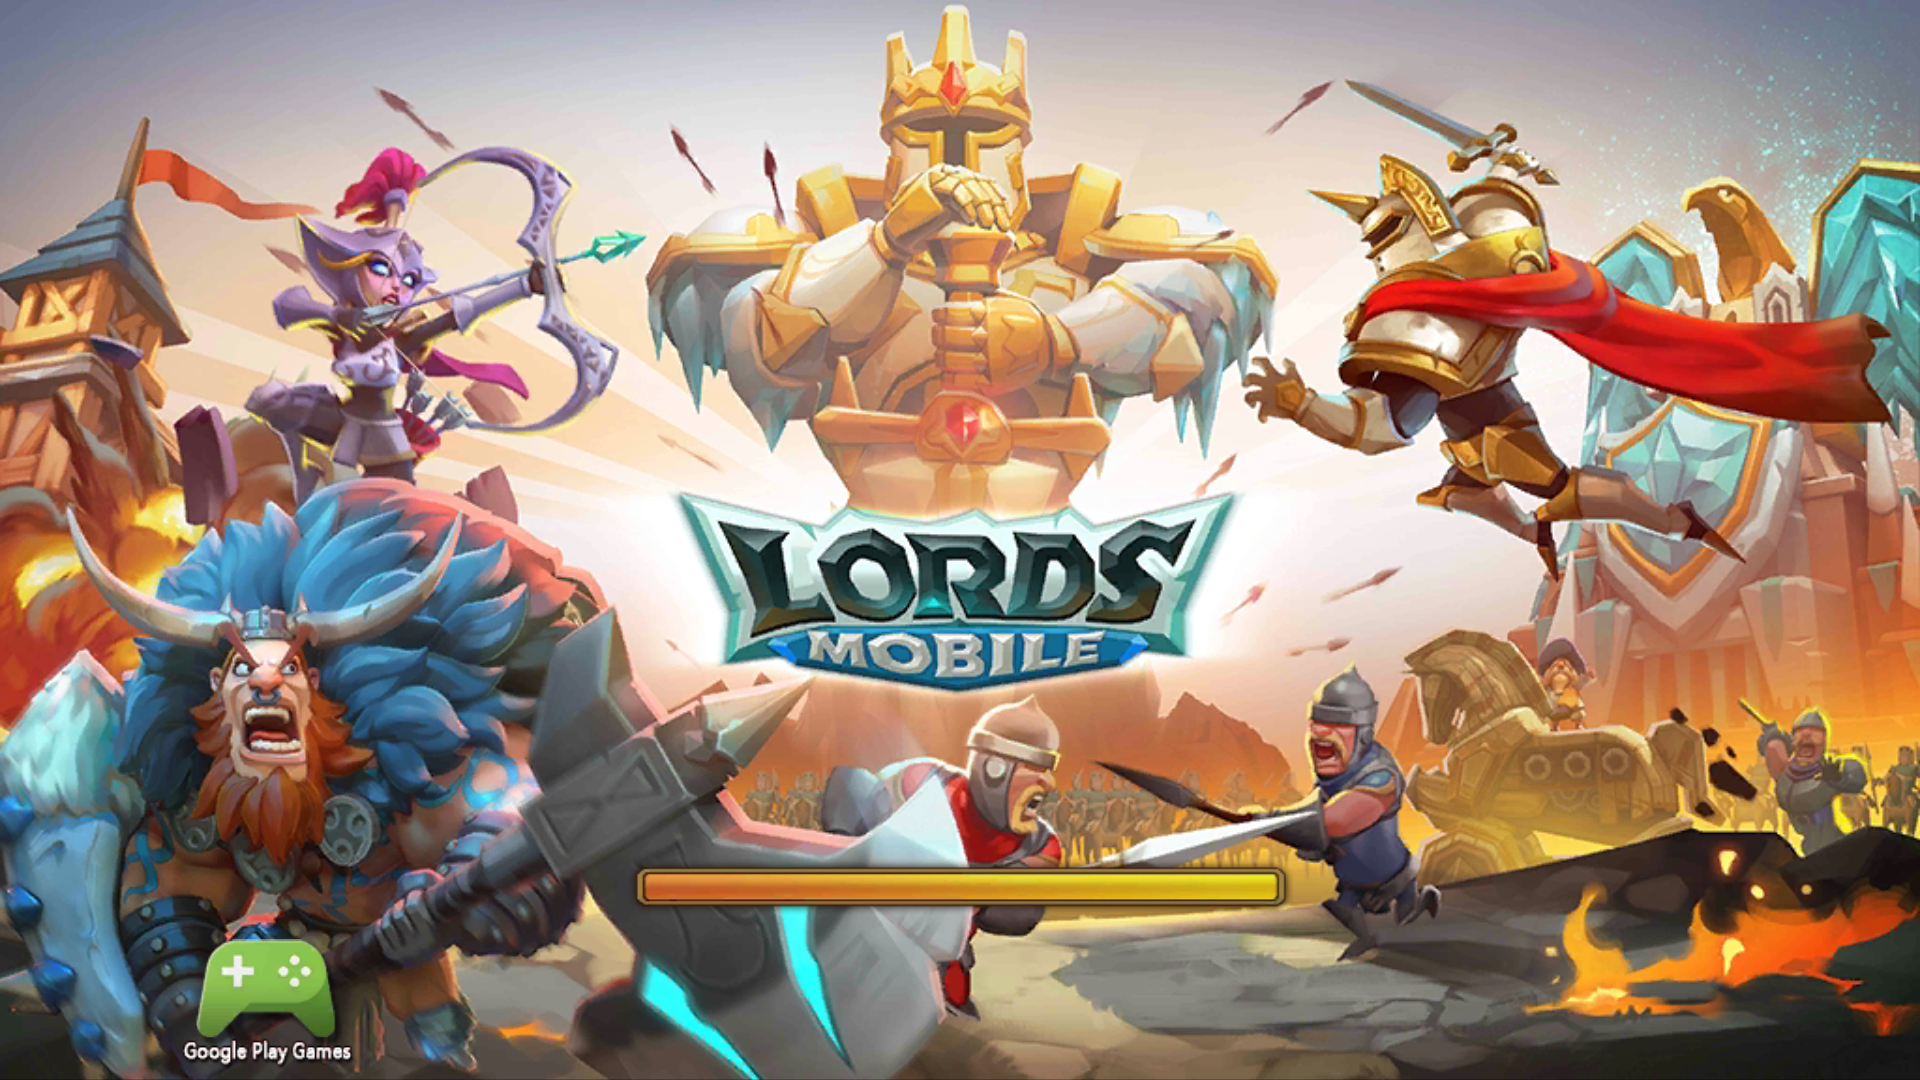 Lords Mobile Modes And Amazing 4K Background!